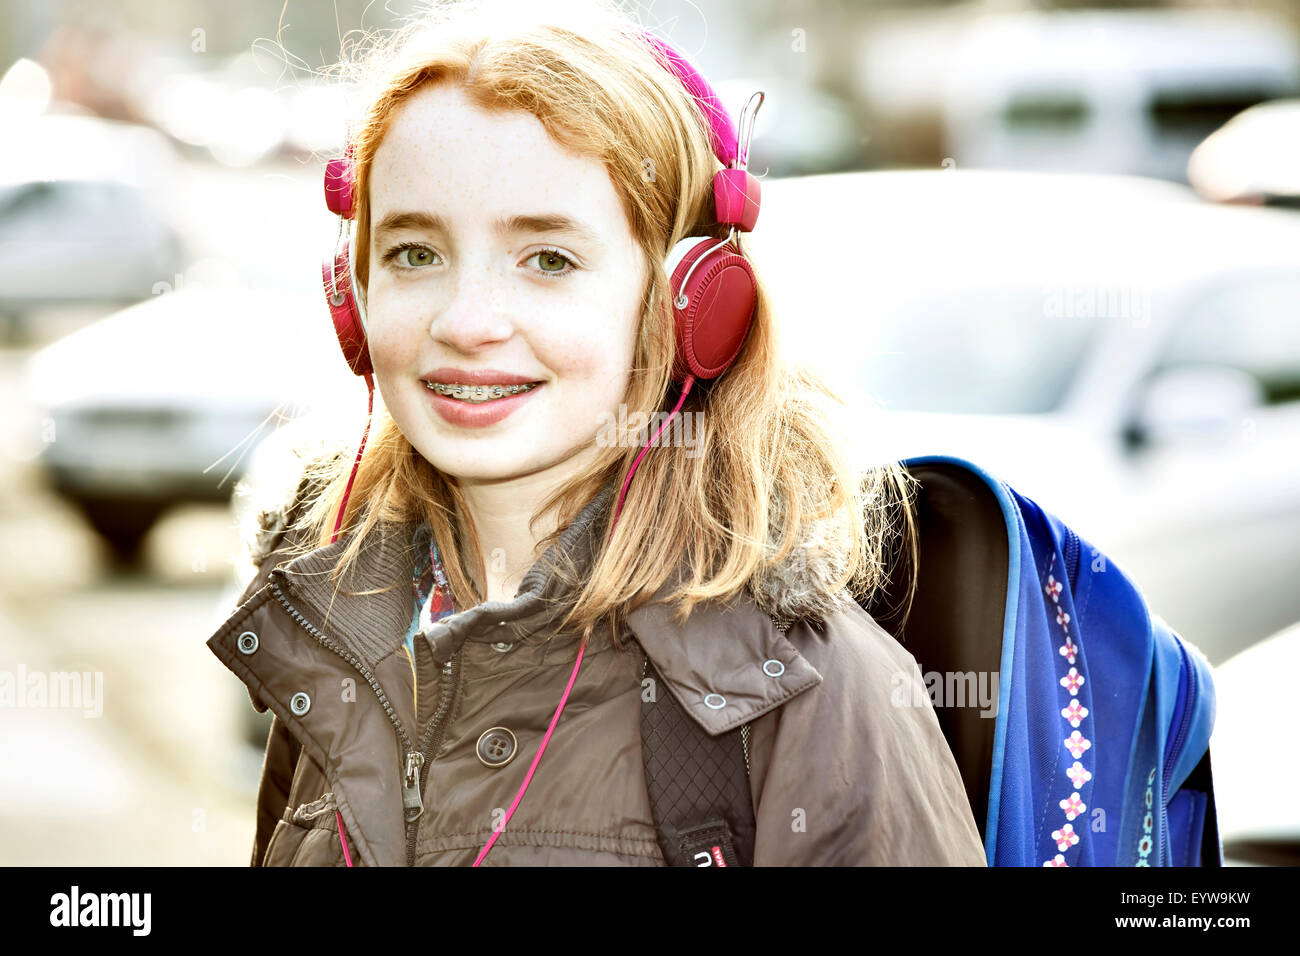 Girl with schoolbag and headphones on the way to school Stock Photo